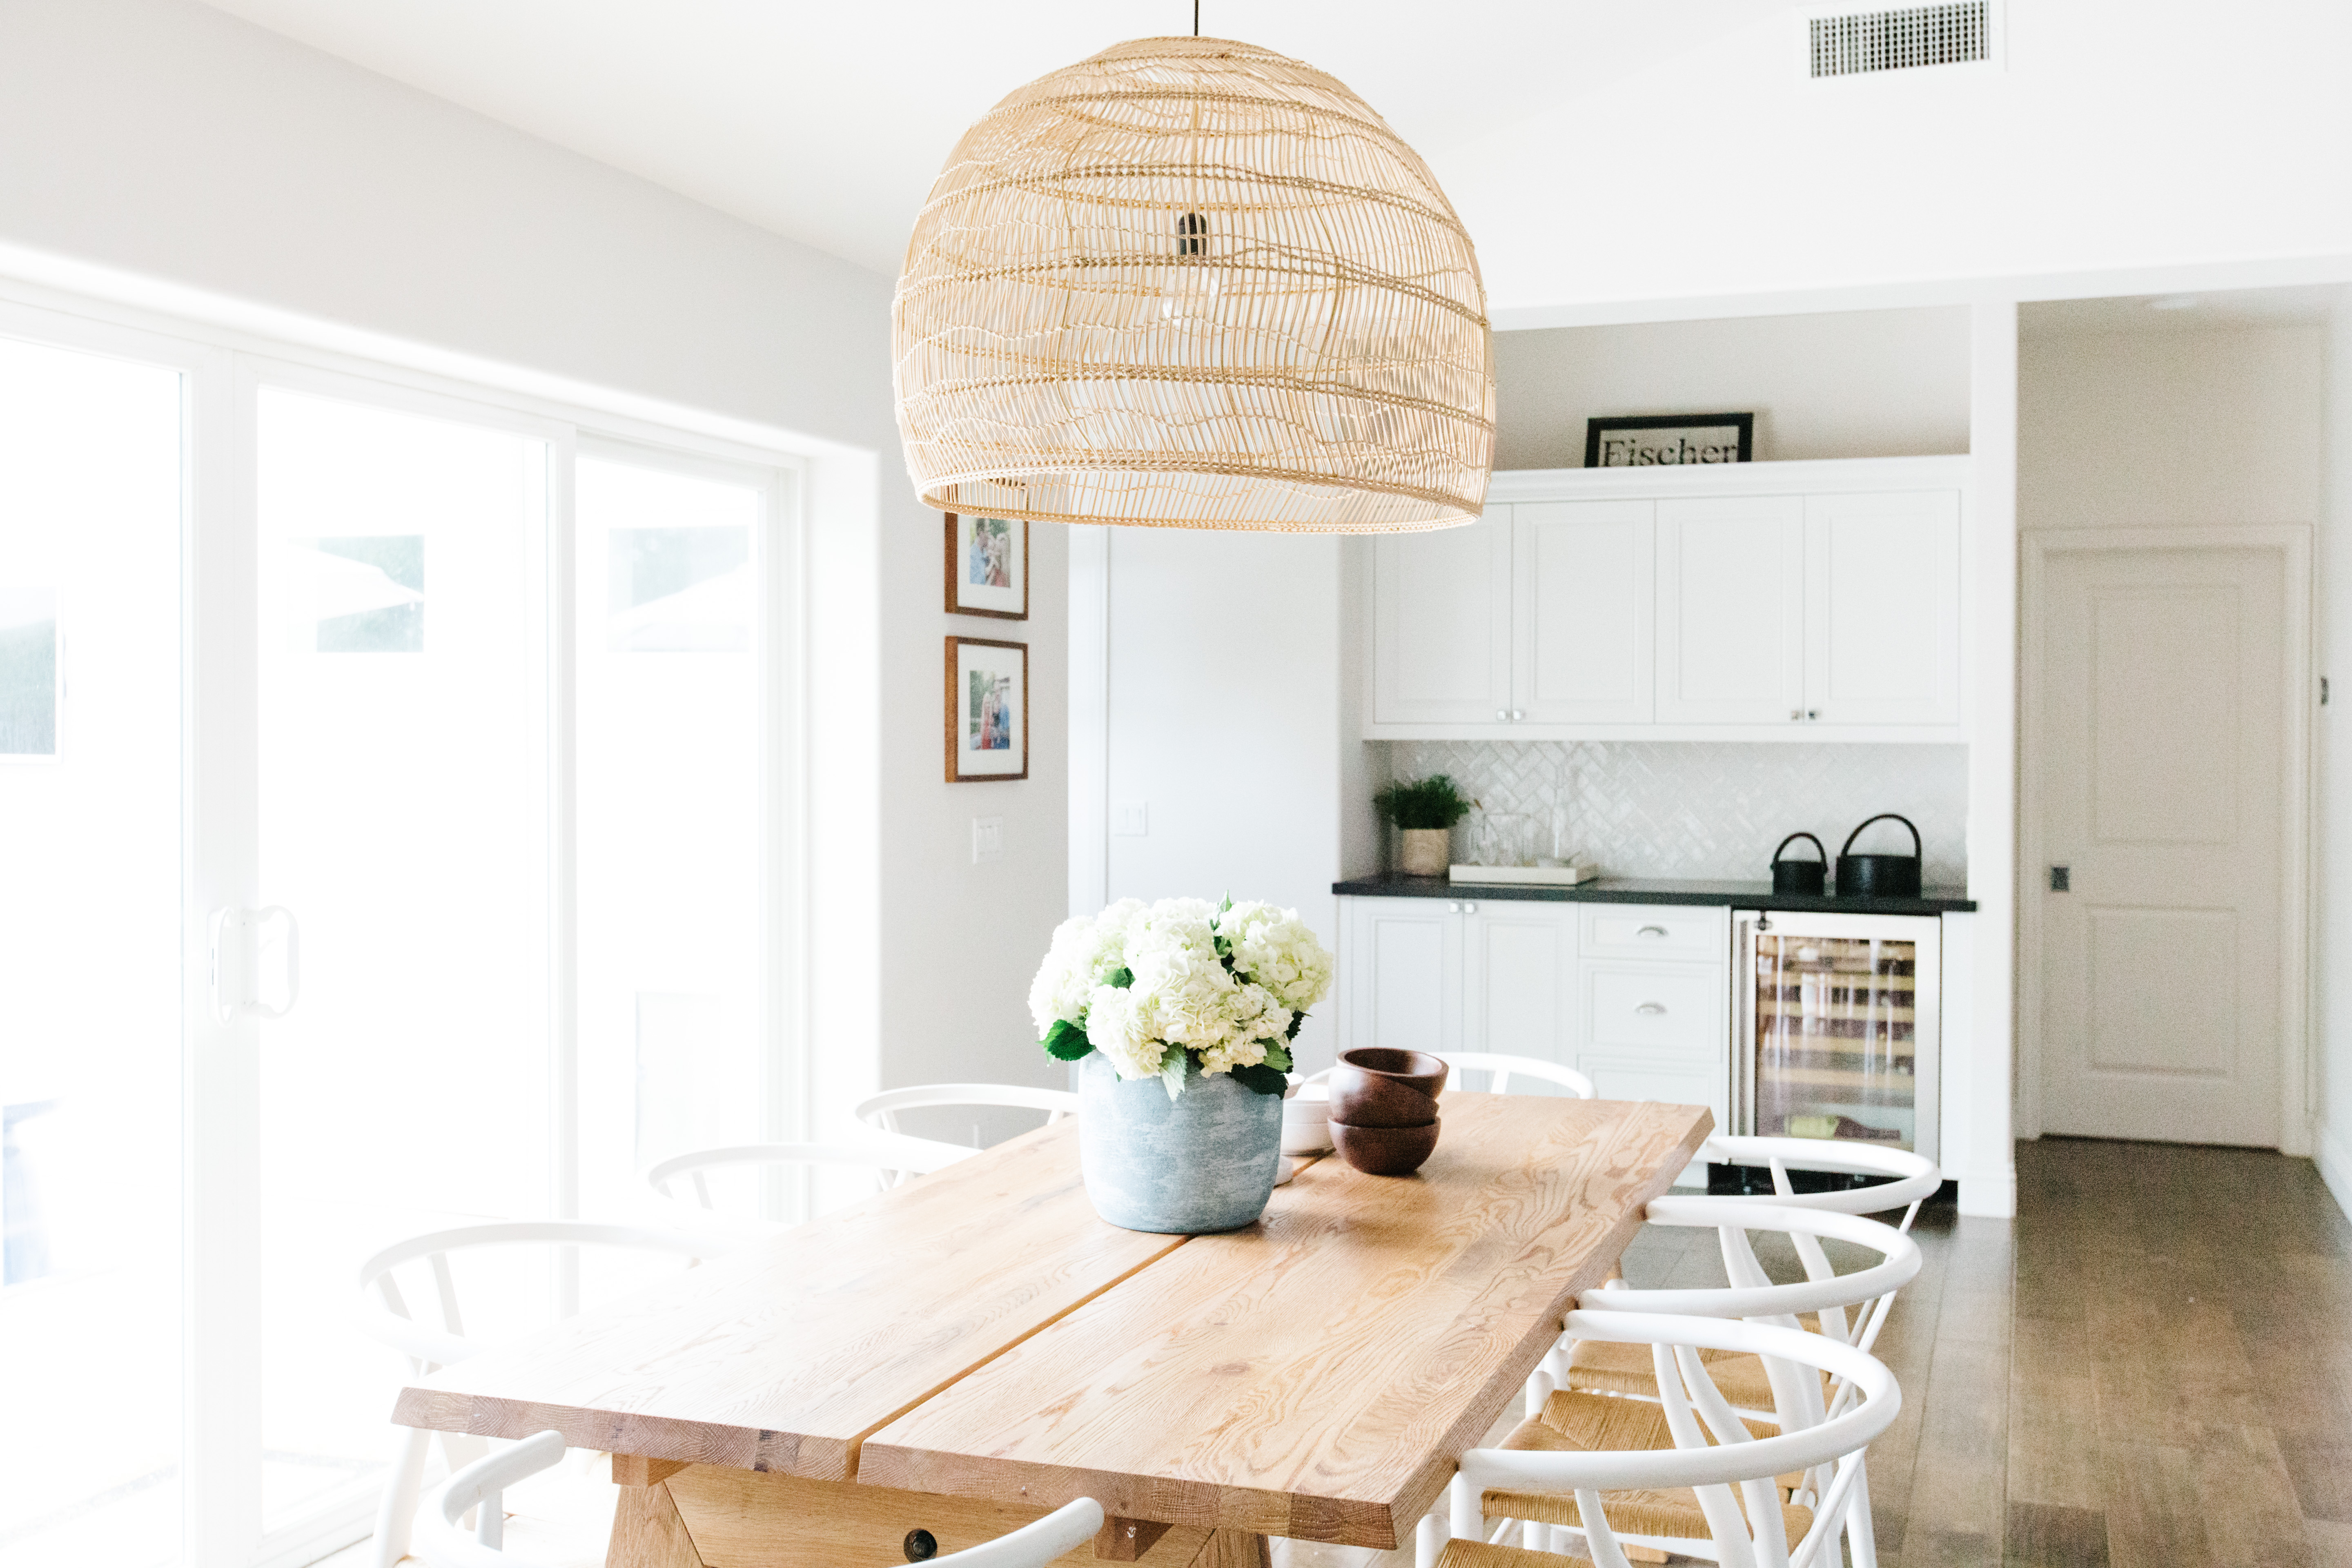 modern wicker light fixture over natural wood table and white chairs